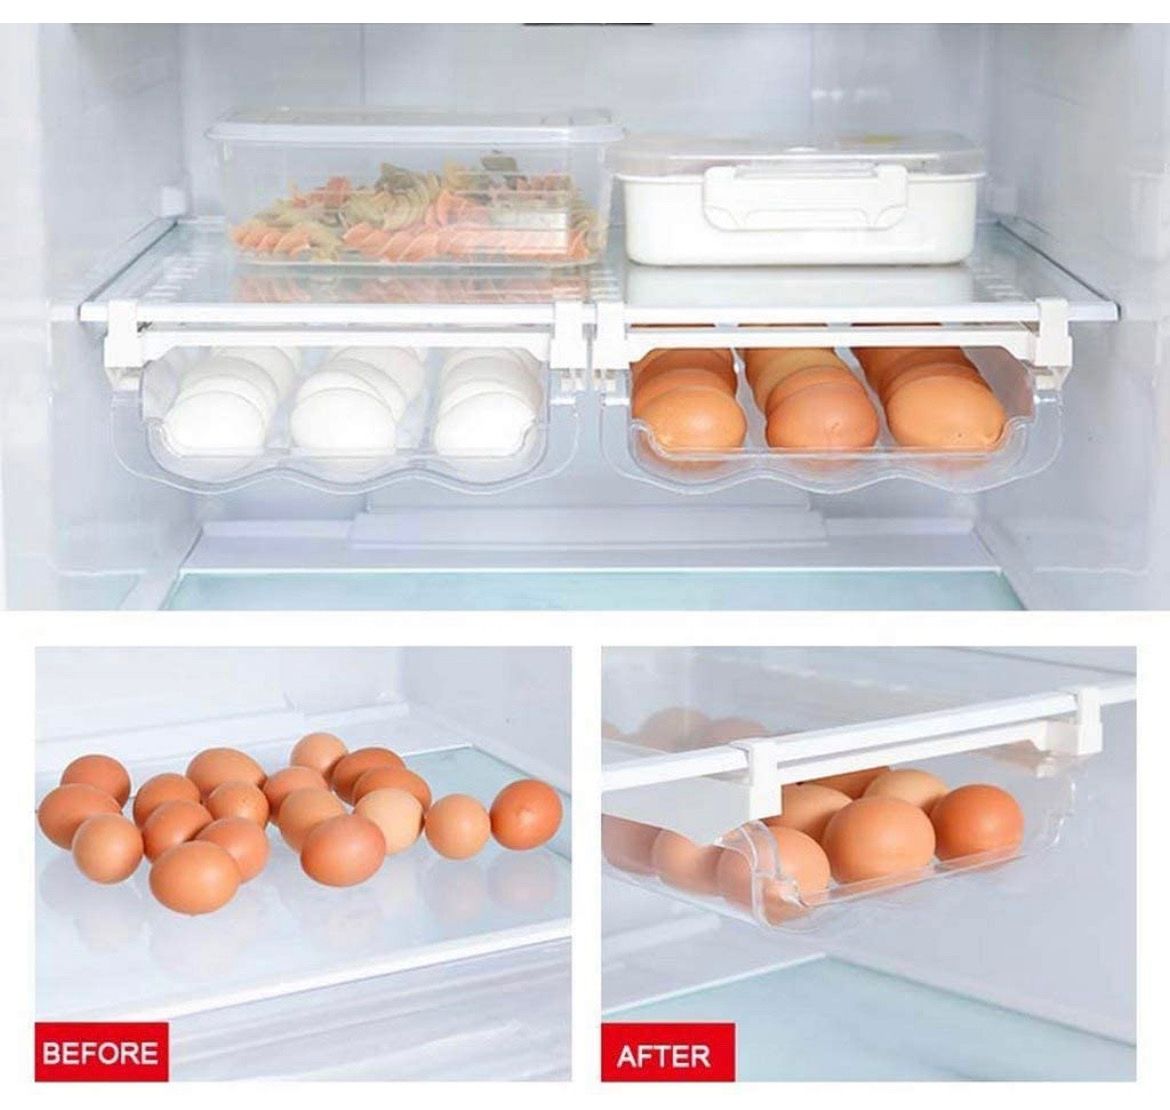 Before and after scene. Before has a pile of eggs on the bottom of the fridge. After has an egg rack.